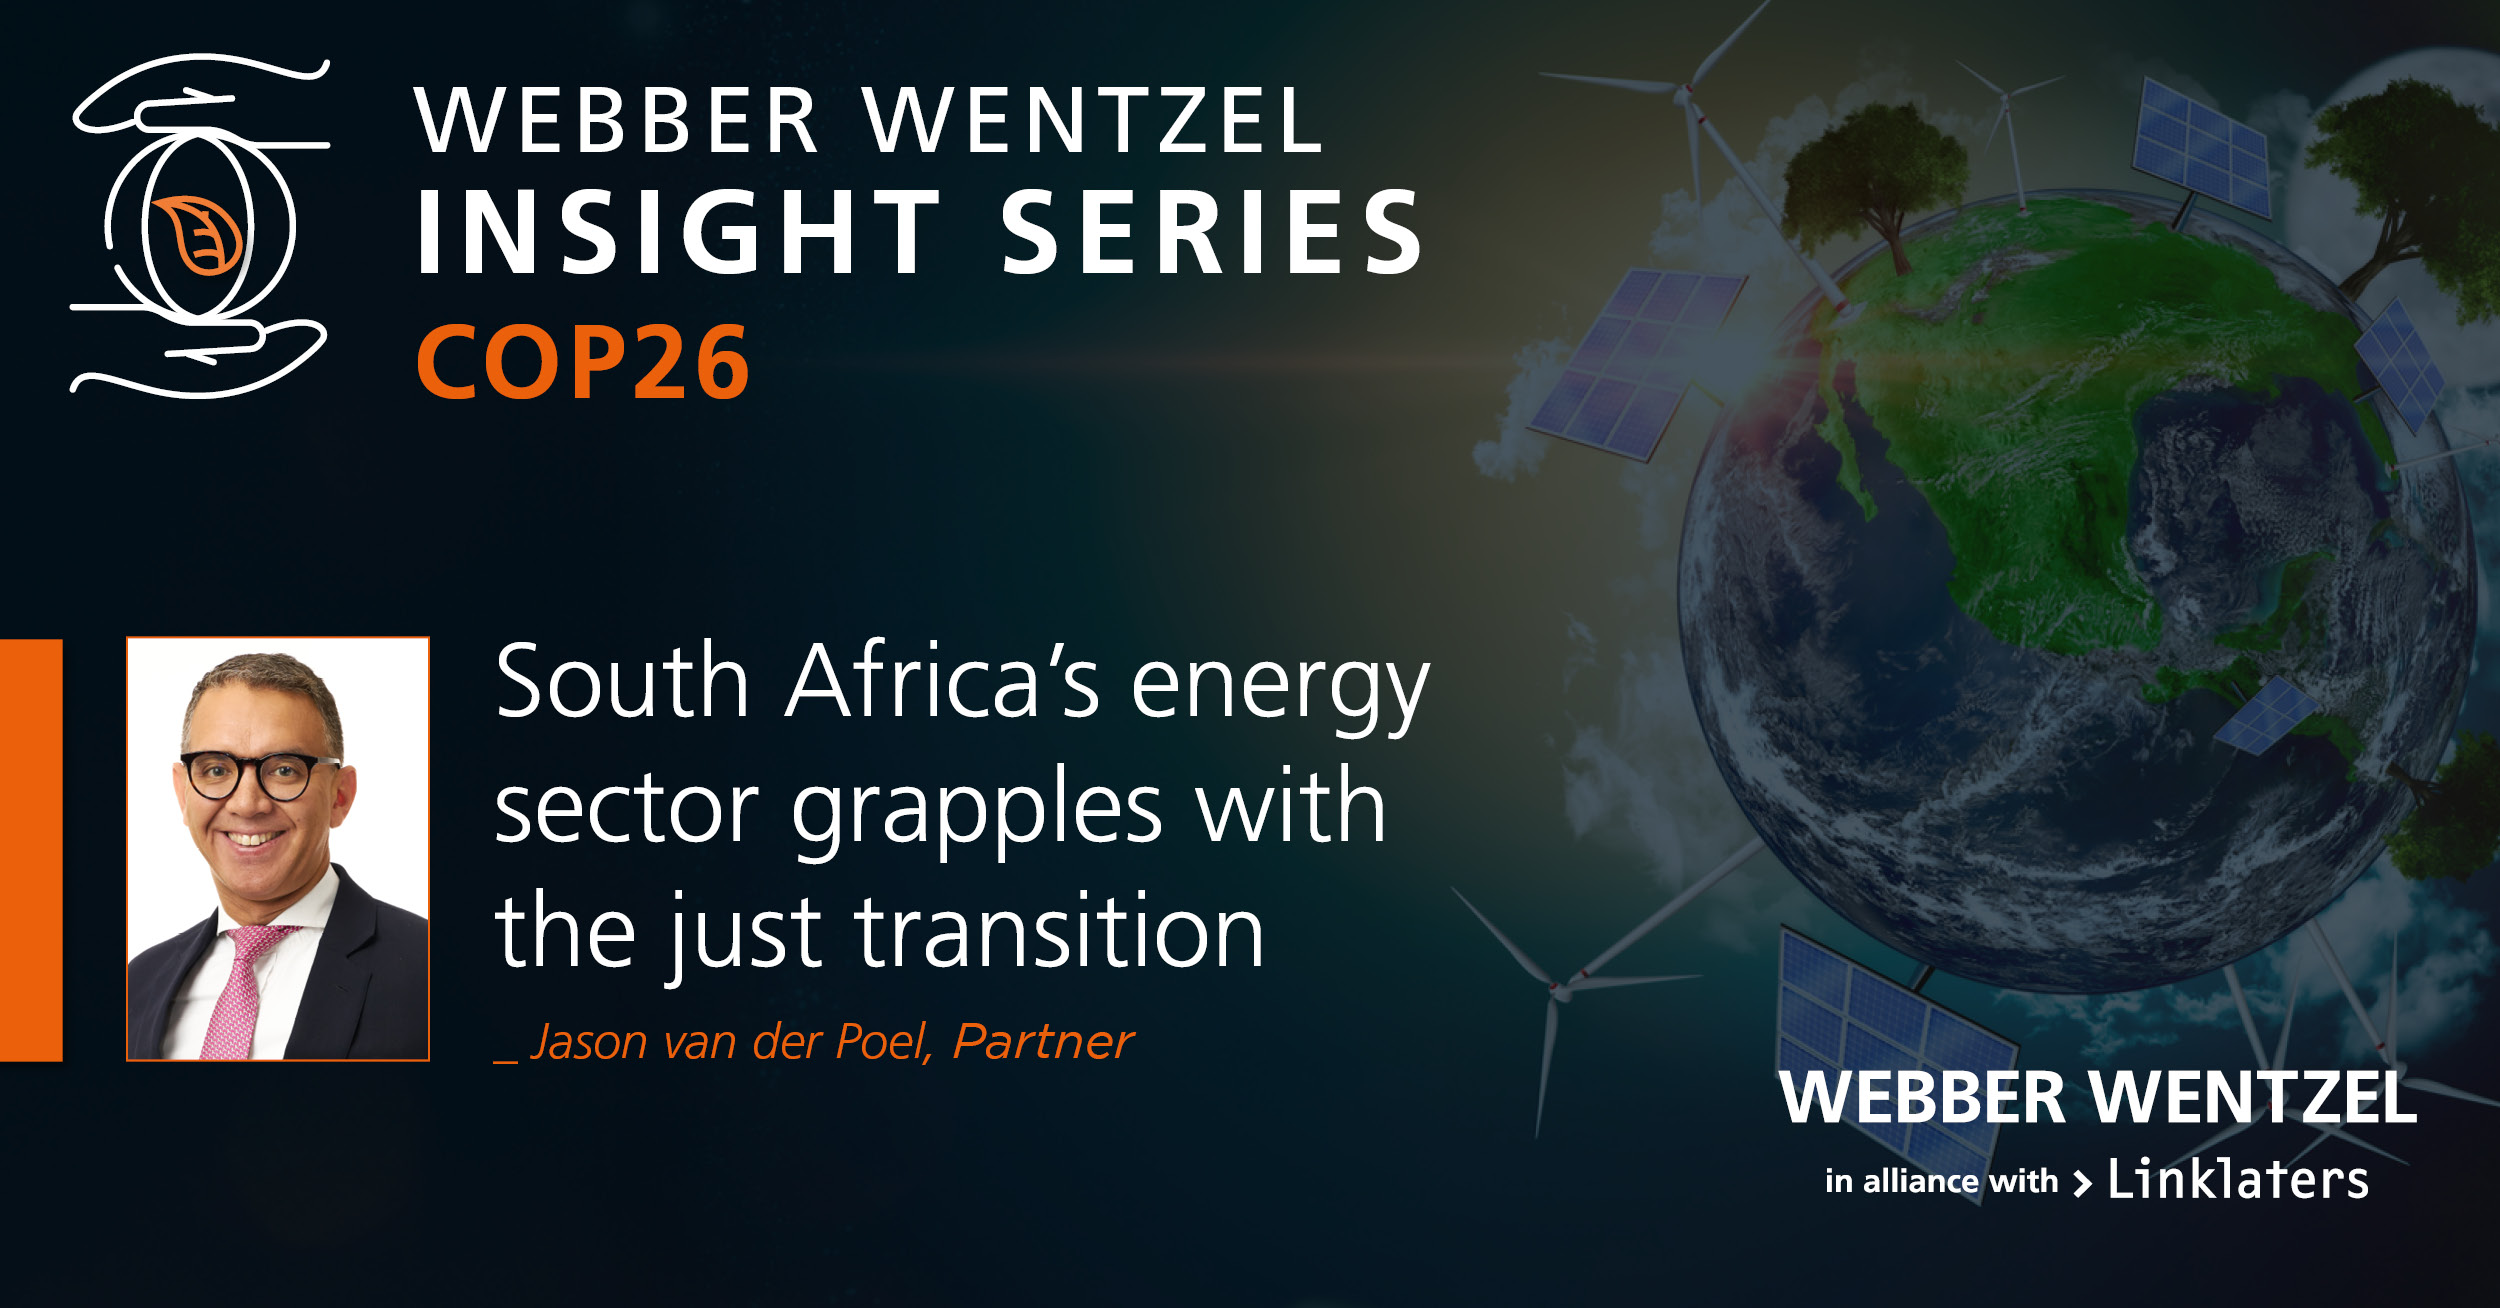 Jason van der Poel - South Africa’s energy sector grapples with the just transition